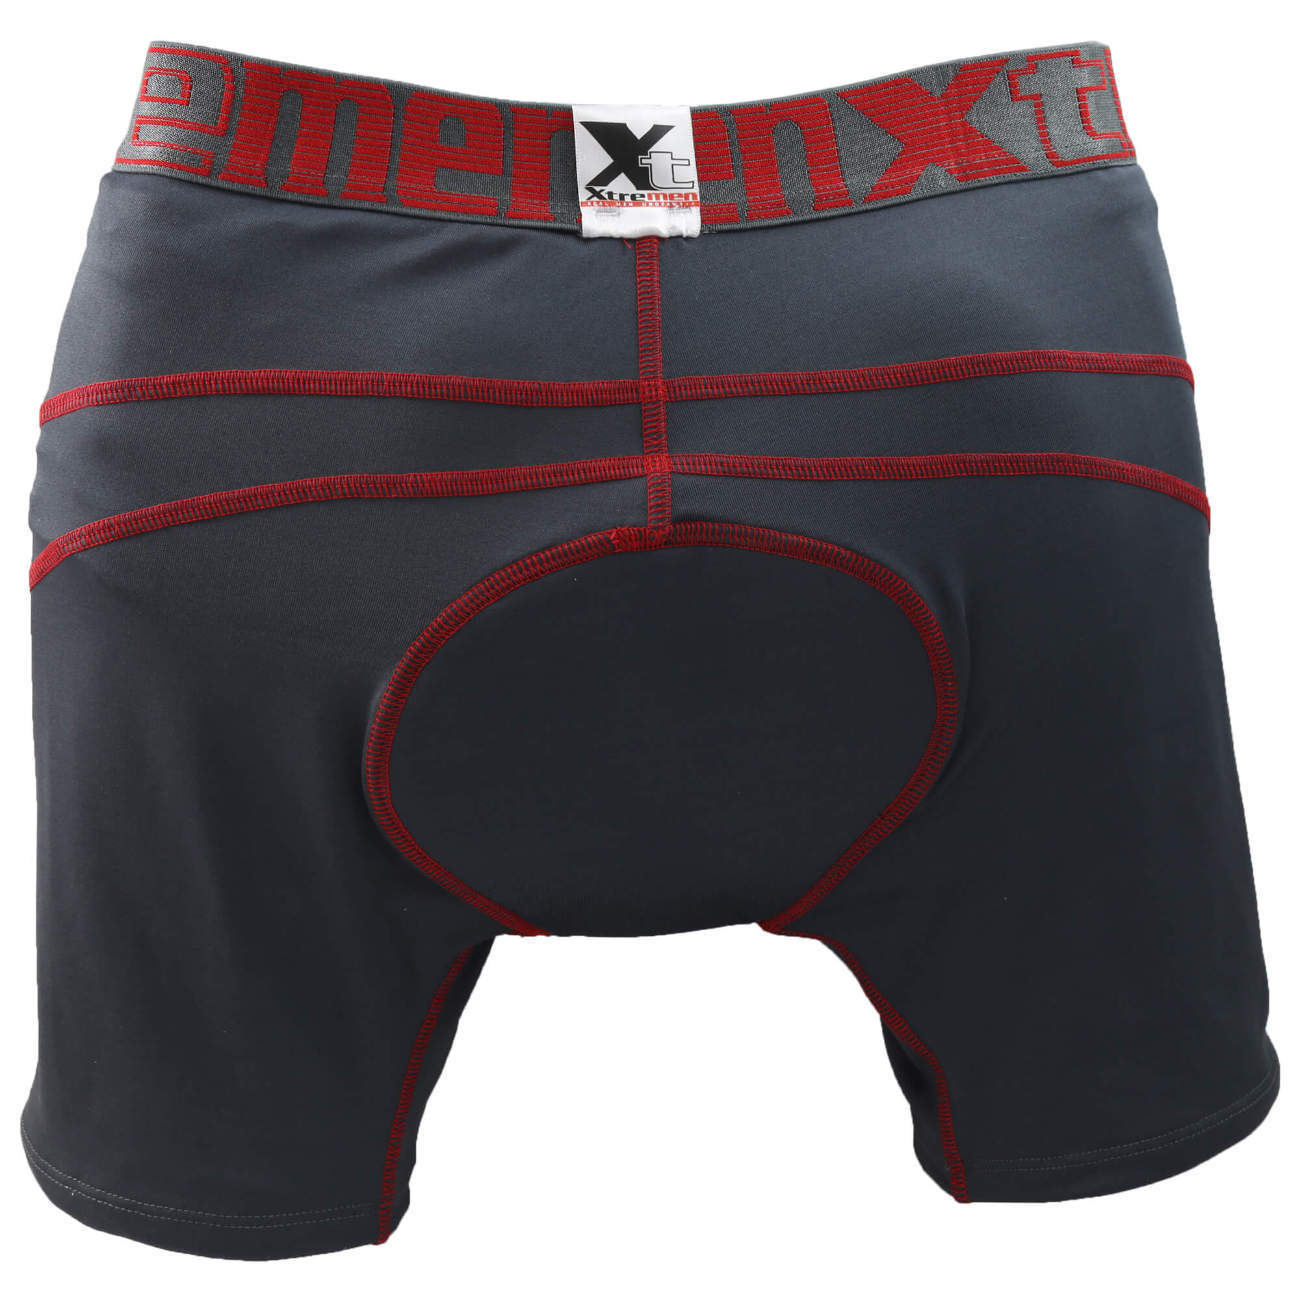 Xtremen 51371 Cycling Padded Boxer Briefs